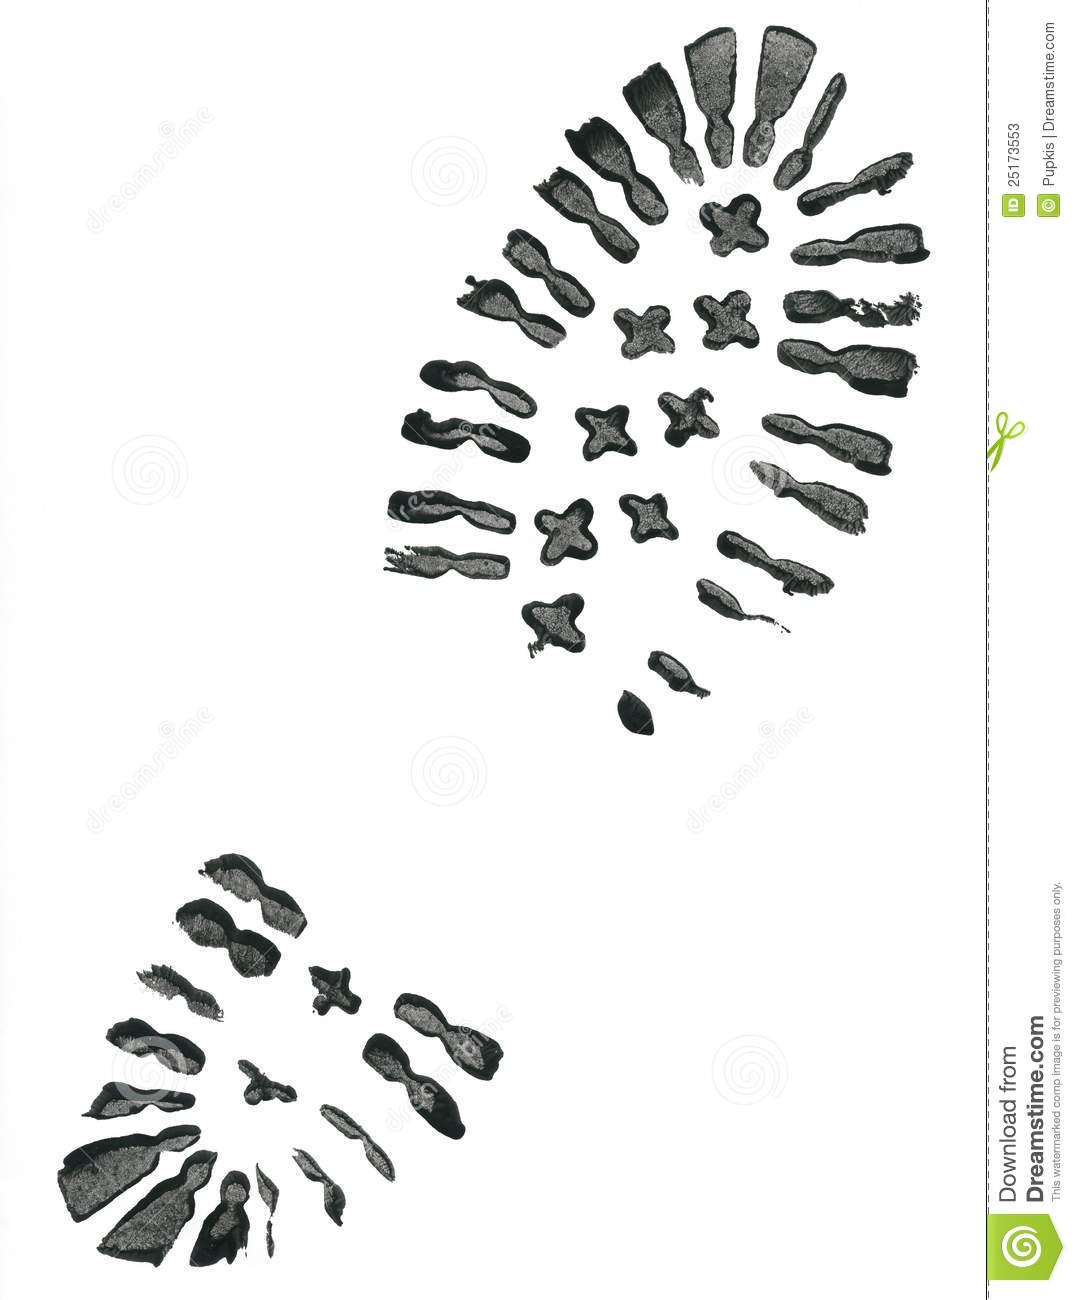 Running Shoe Prints Free Clipart   Free Clip Art Images